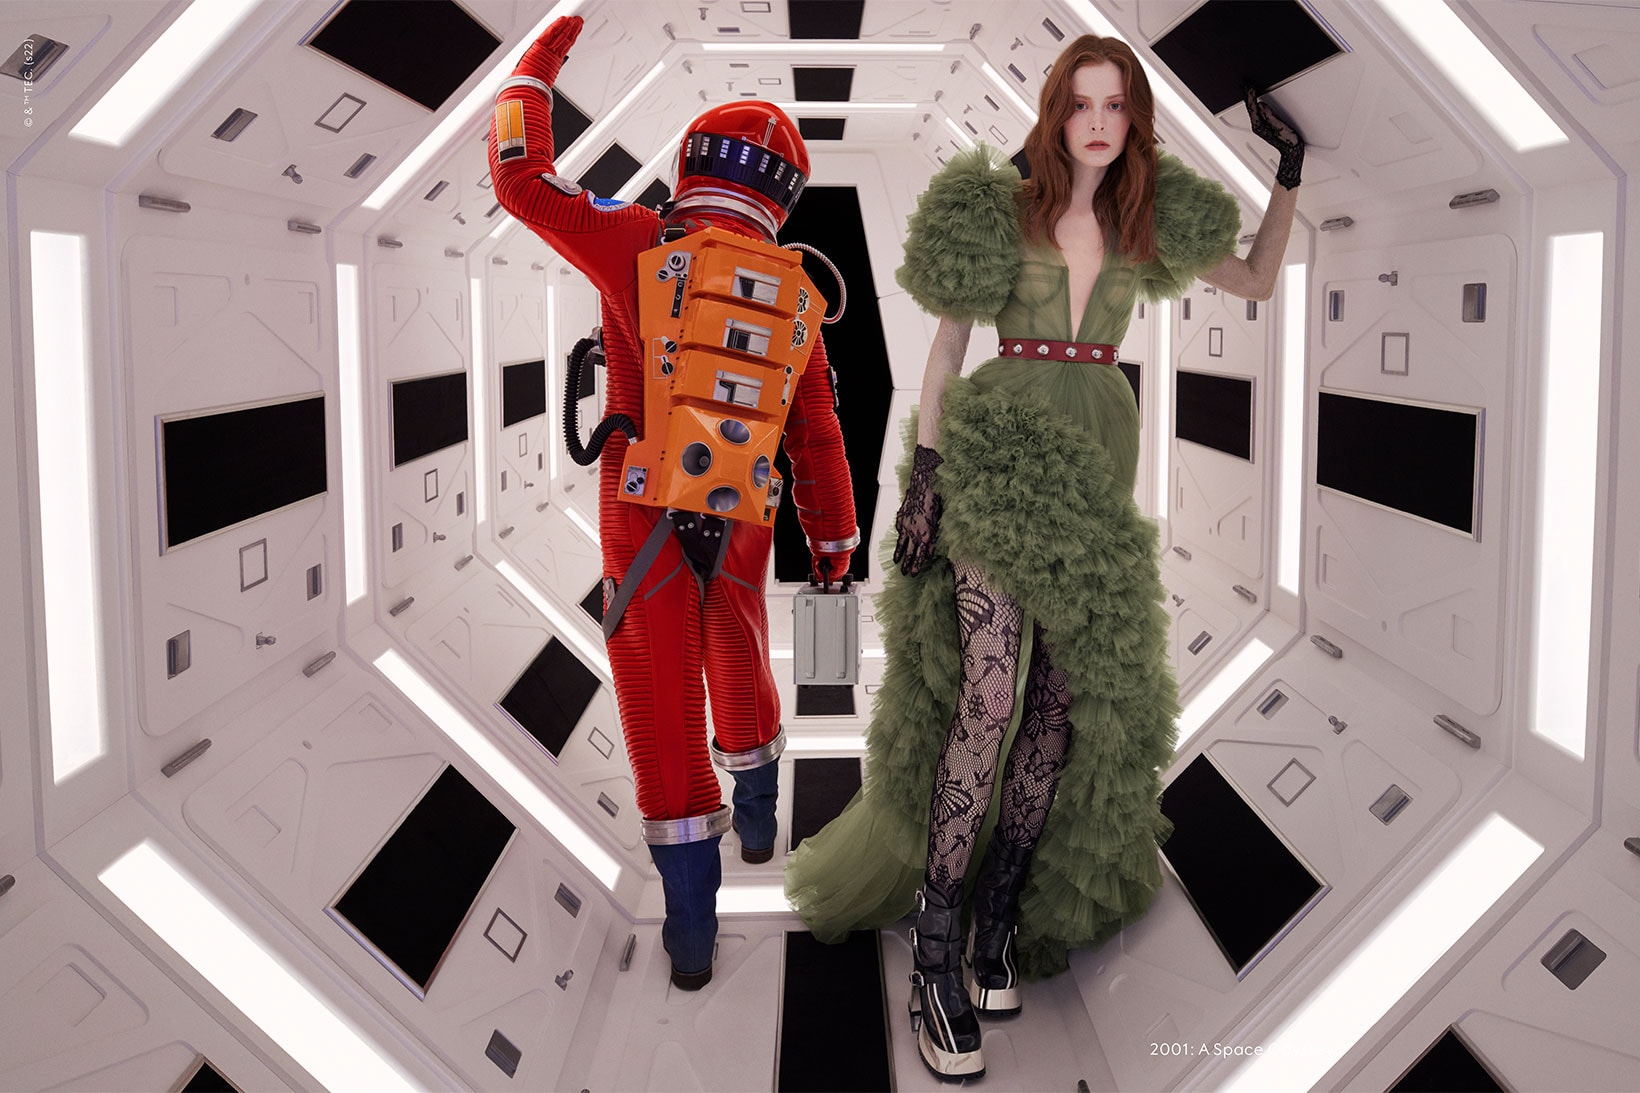 Gucci Celebrates Stanley Kubrick in New Campaign